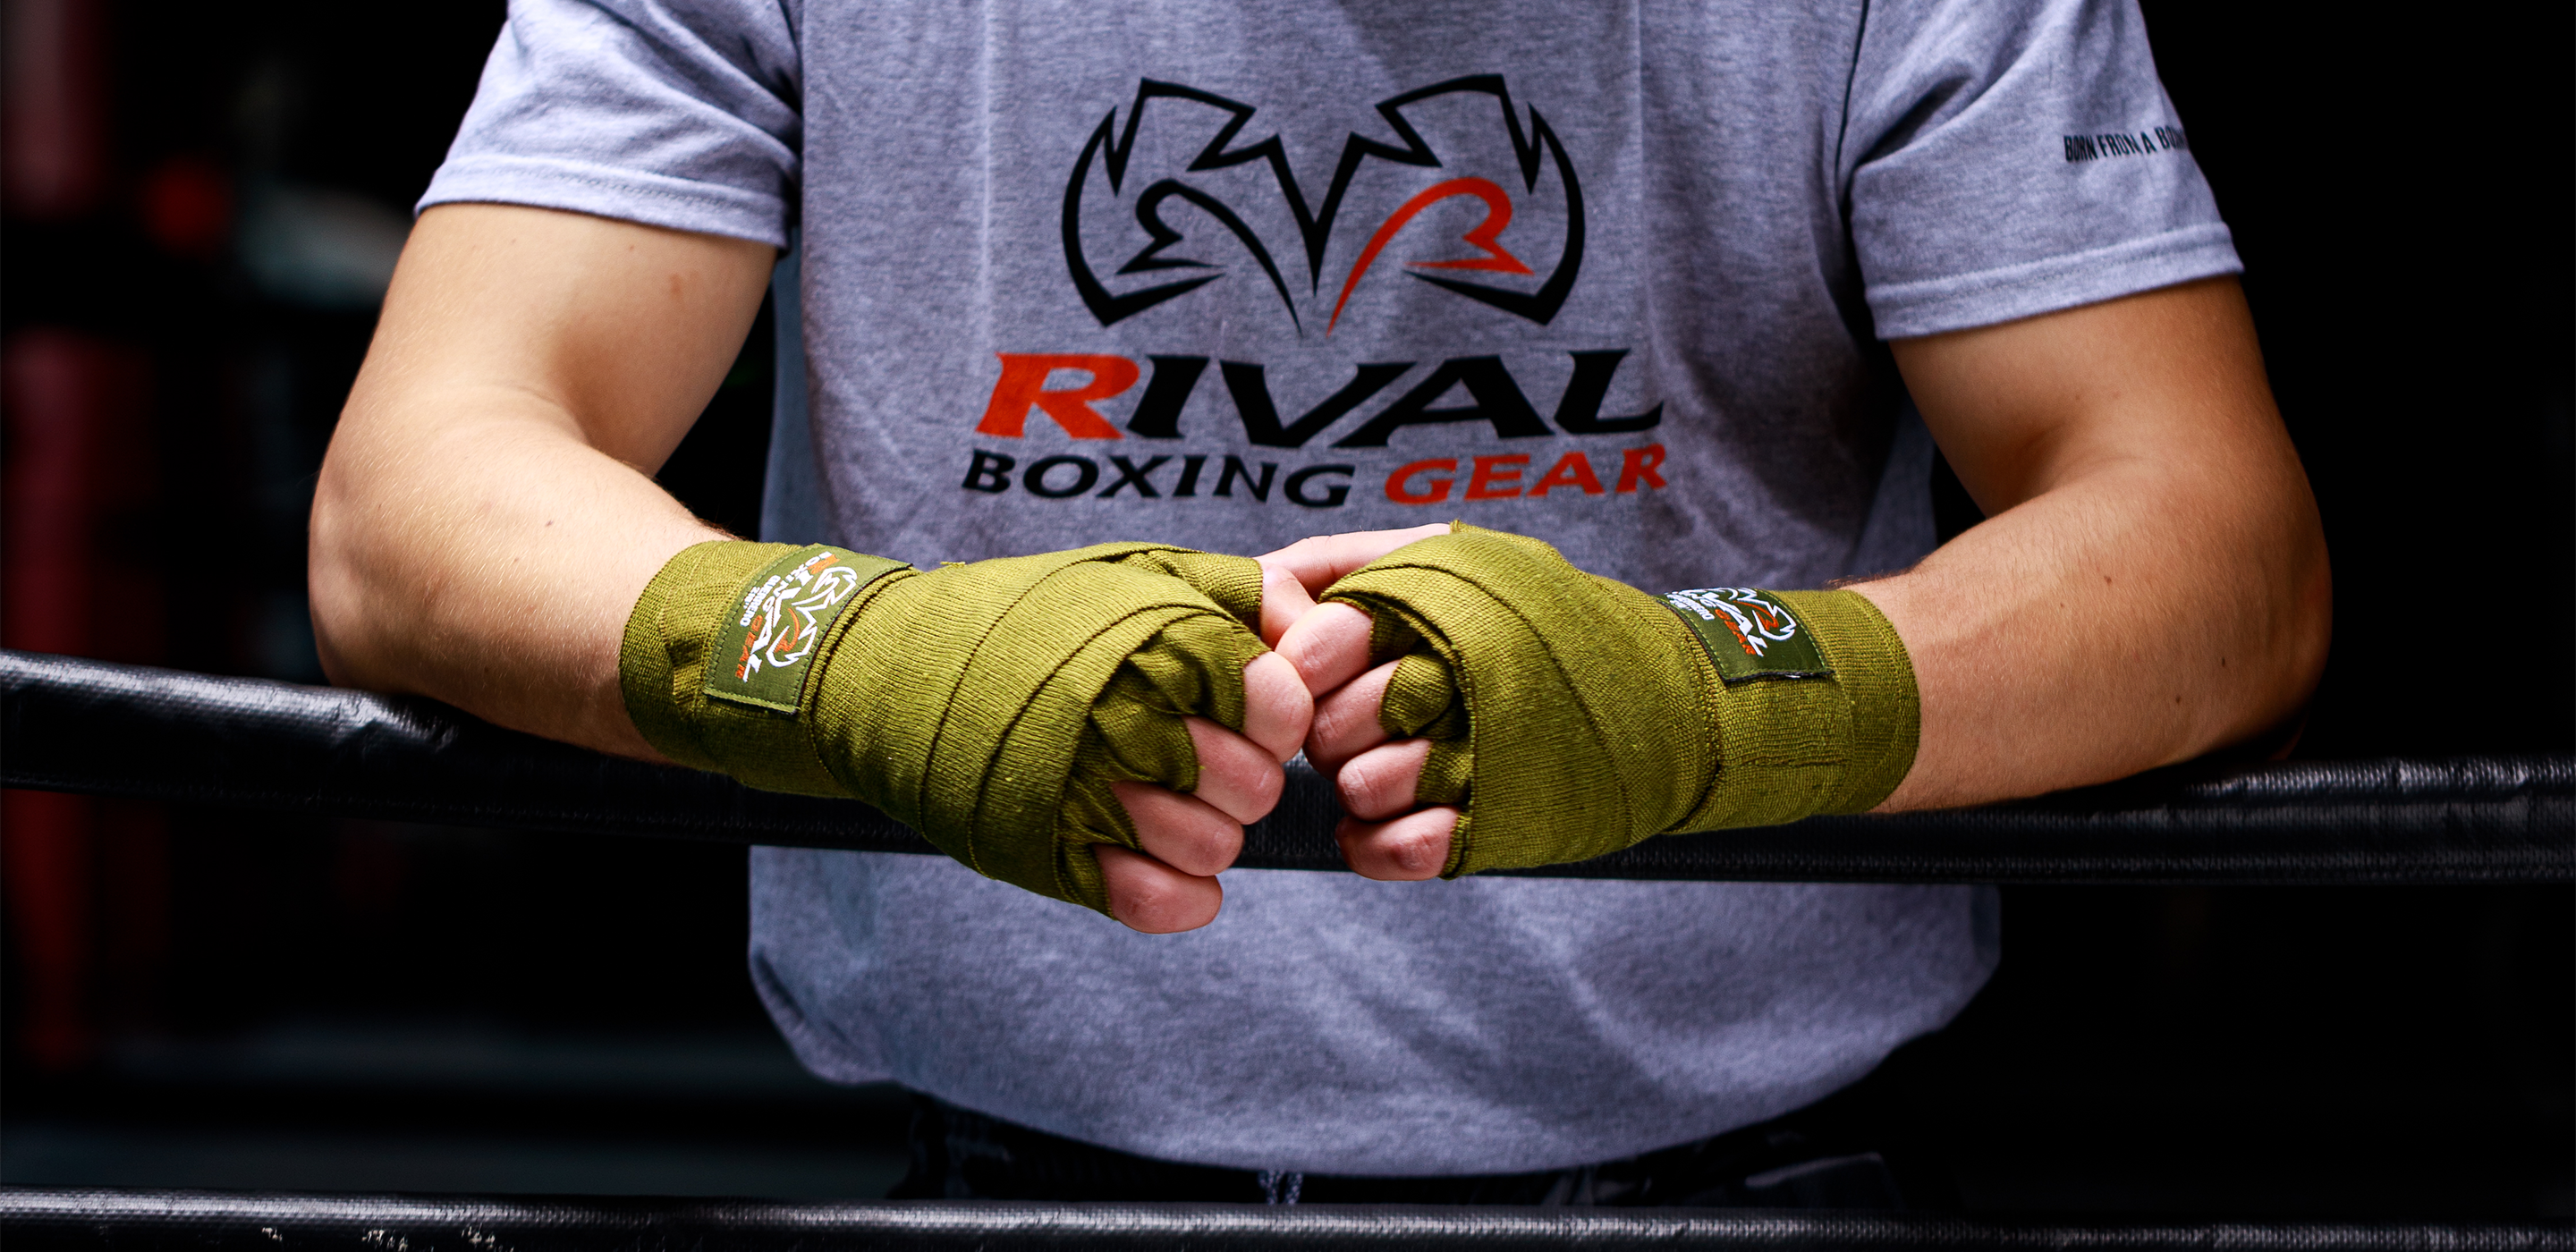 Gym-Store Uk - Beast Gear Advanced Boxing Hand Wraps – For Combat